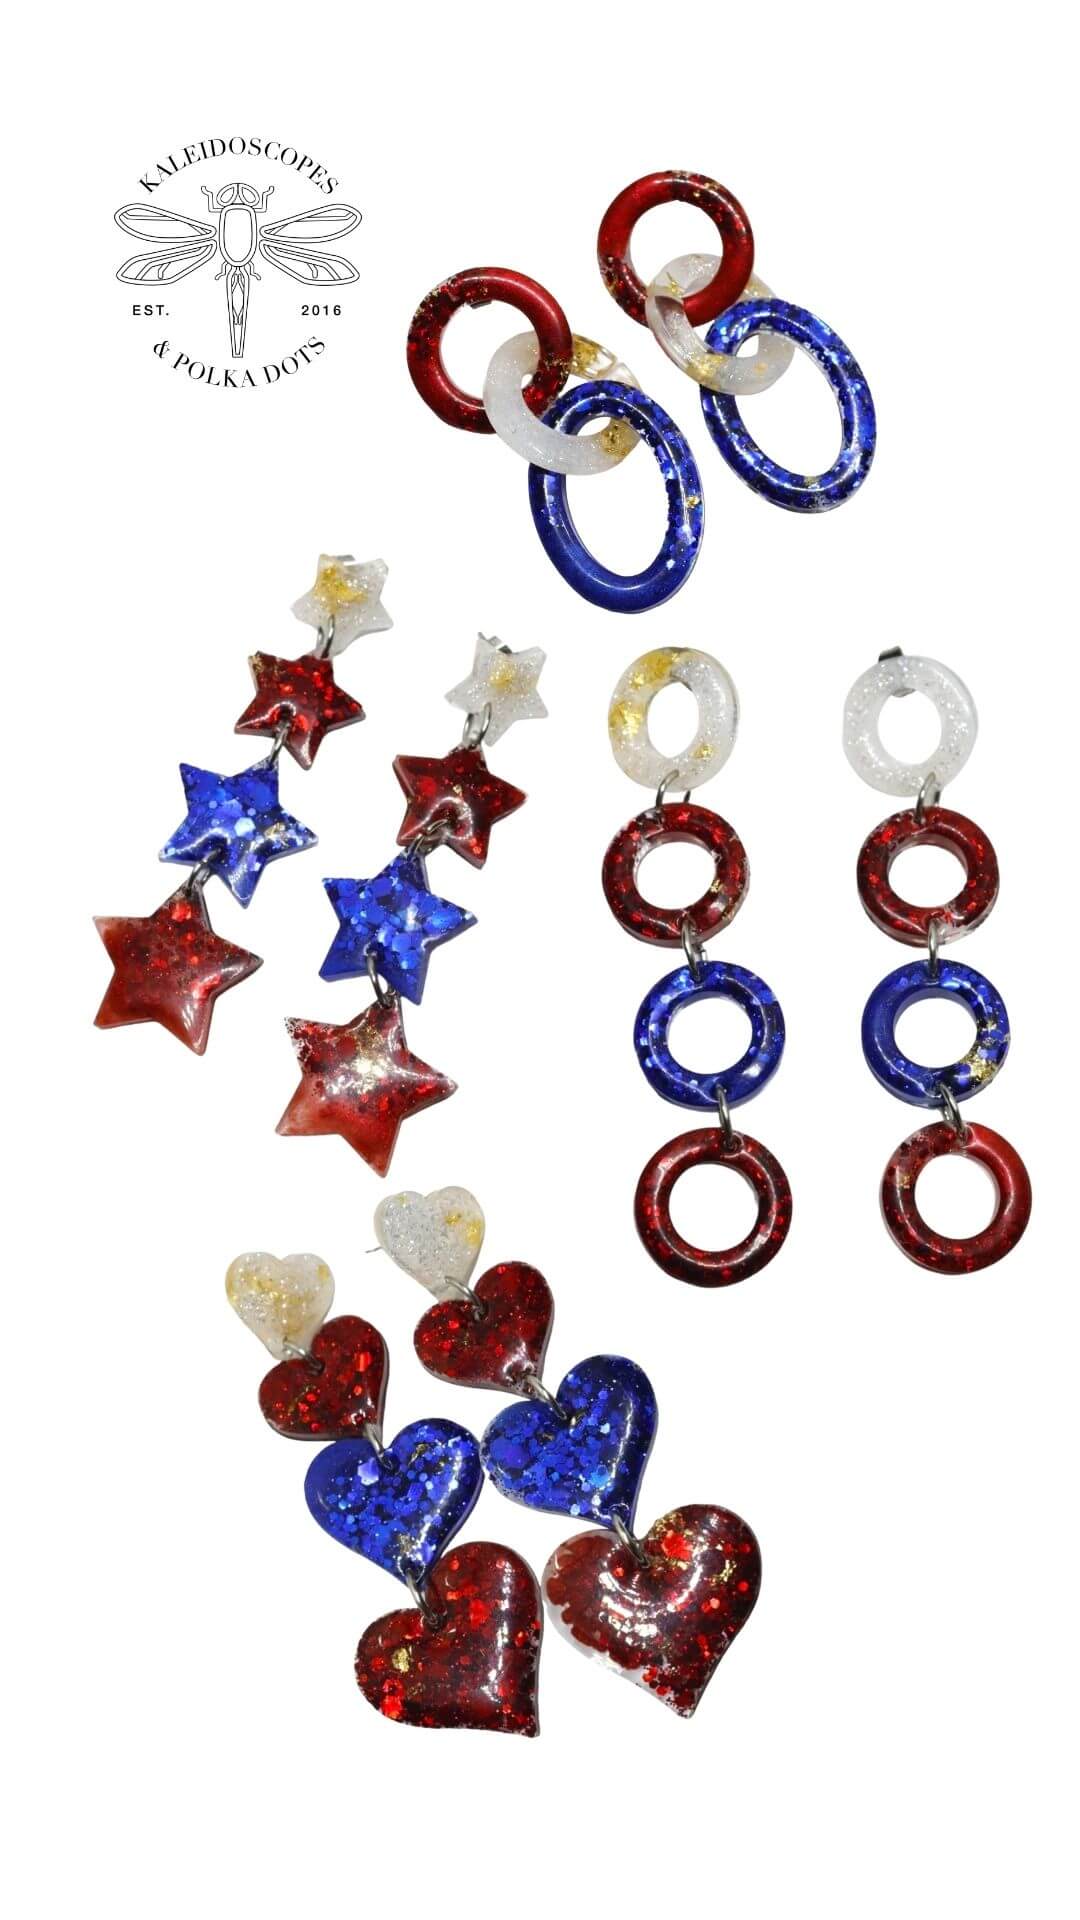 red-white-and-blue-earrings---stainless-steel-earrings---long-statement-earrings---kaleidoscopes-and-polka-dots